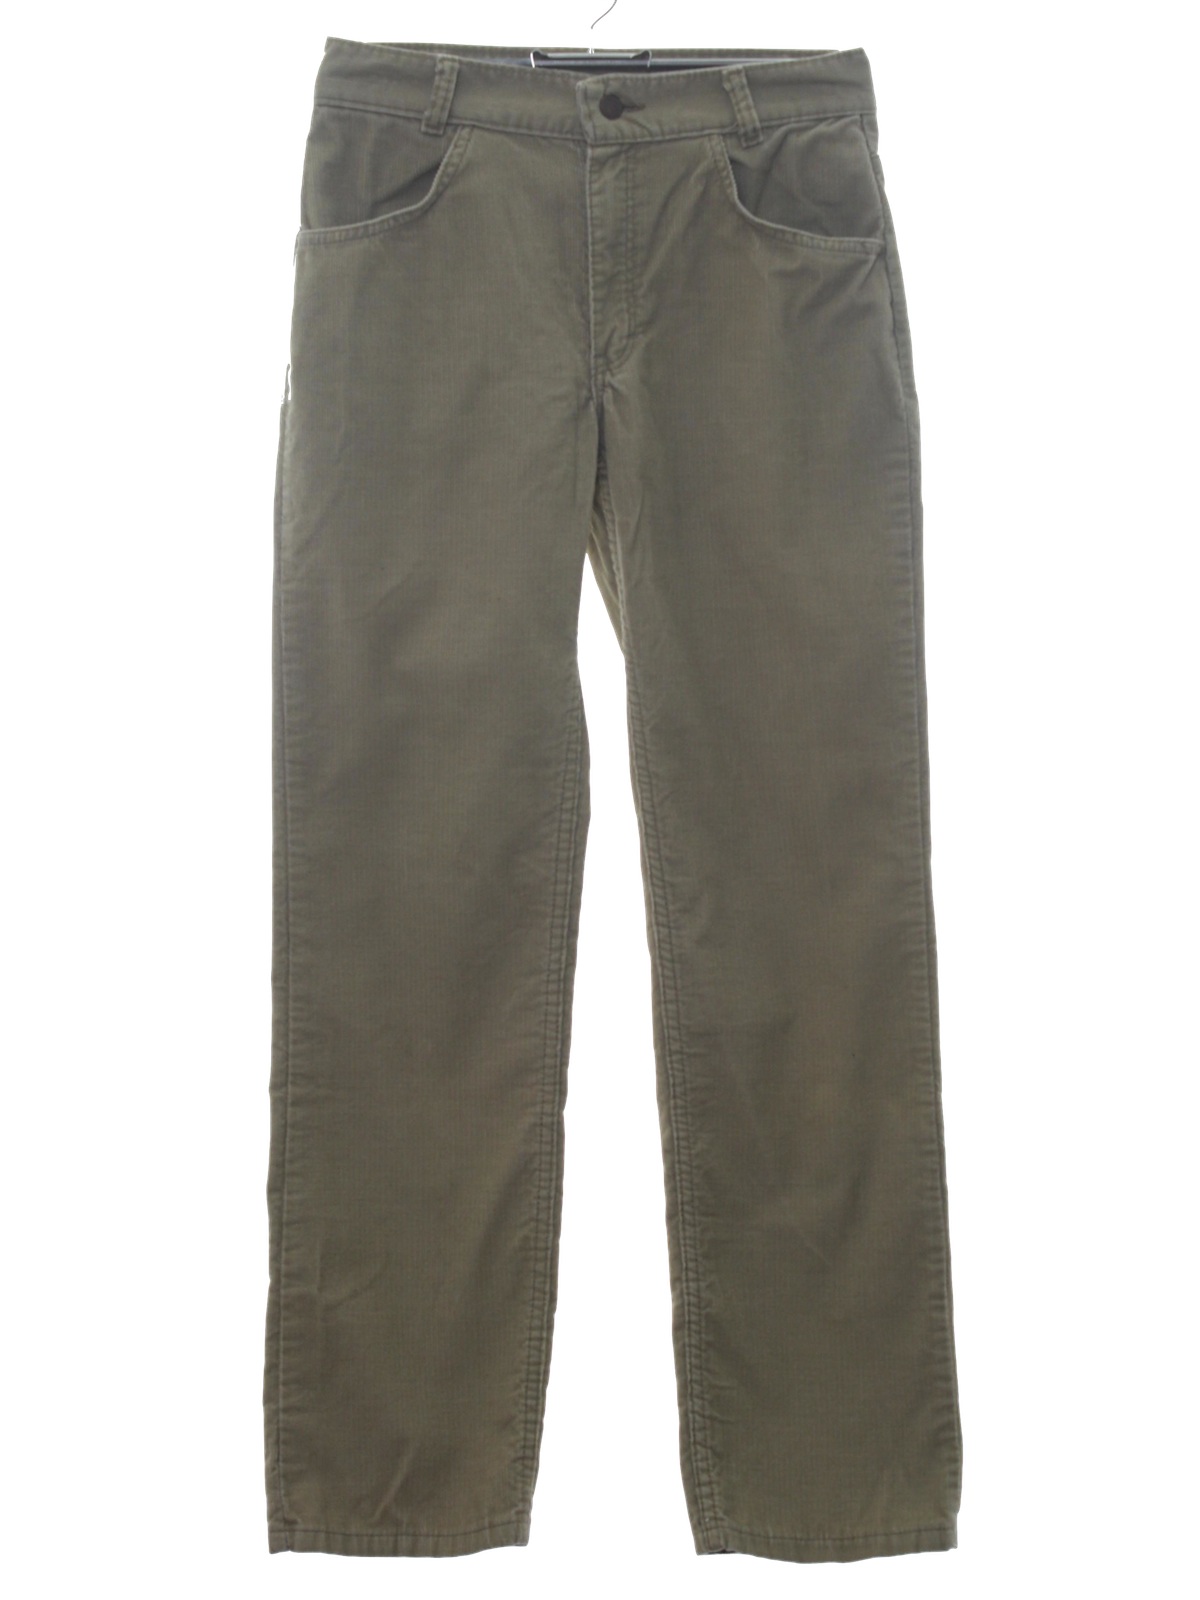 1980's Retro Pants: 80s -Student Cut- Mens or Boys light tan cotton and ...